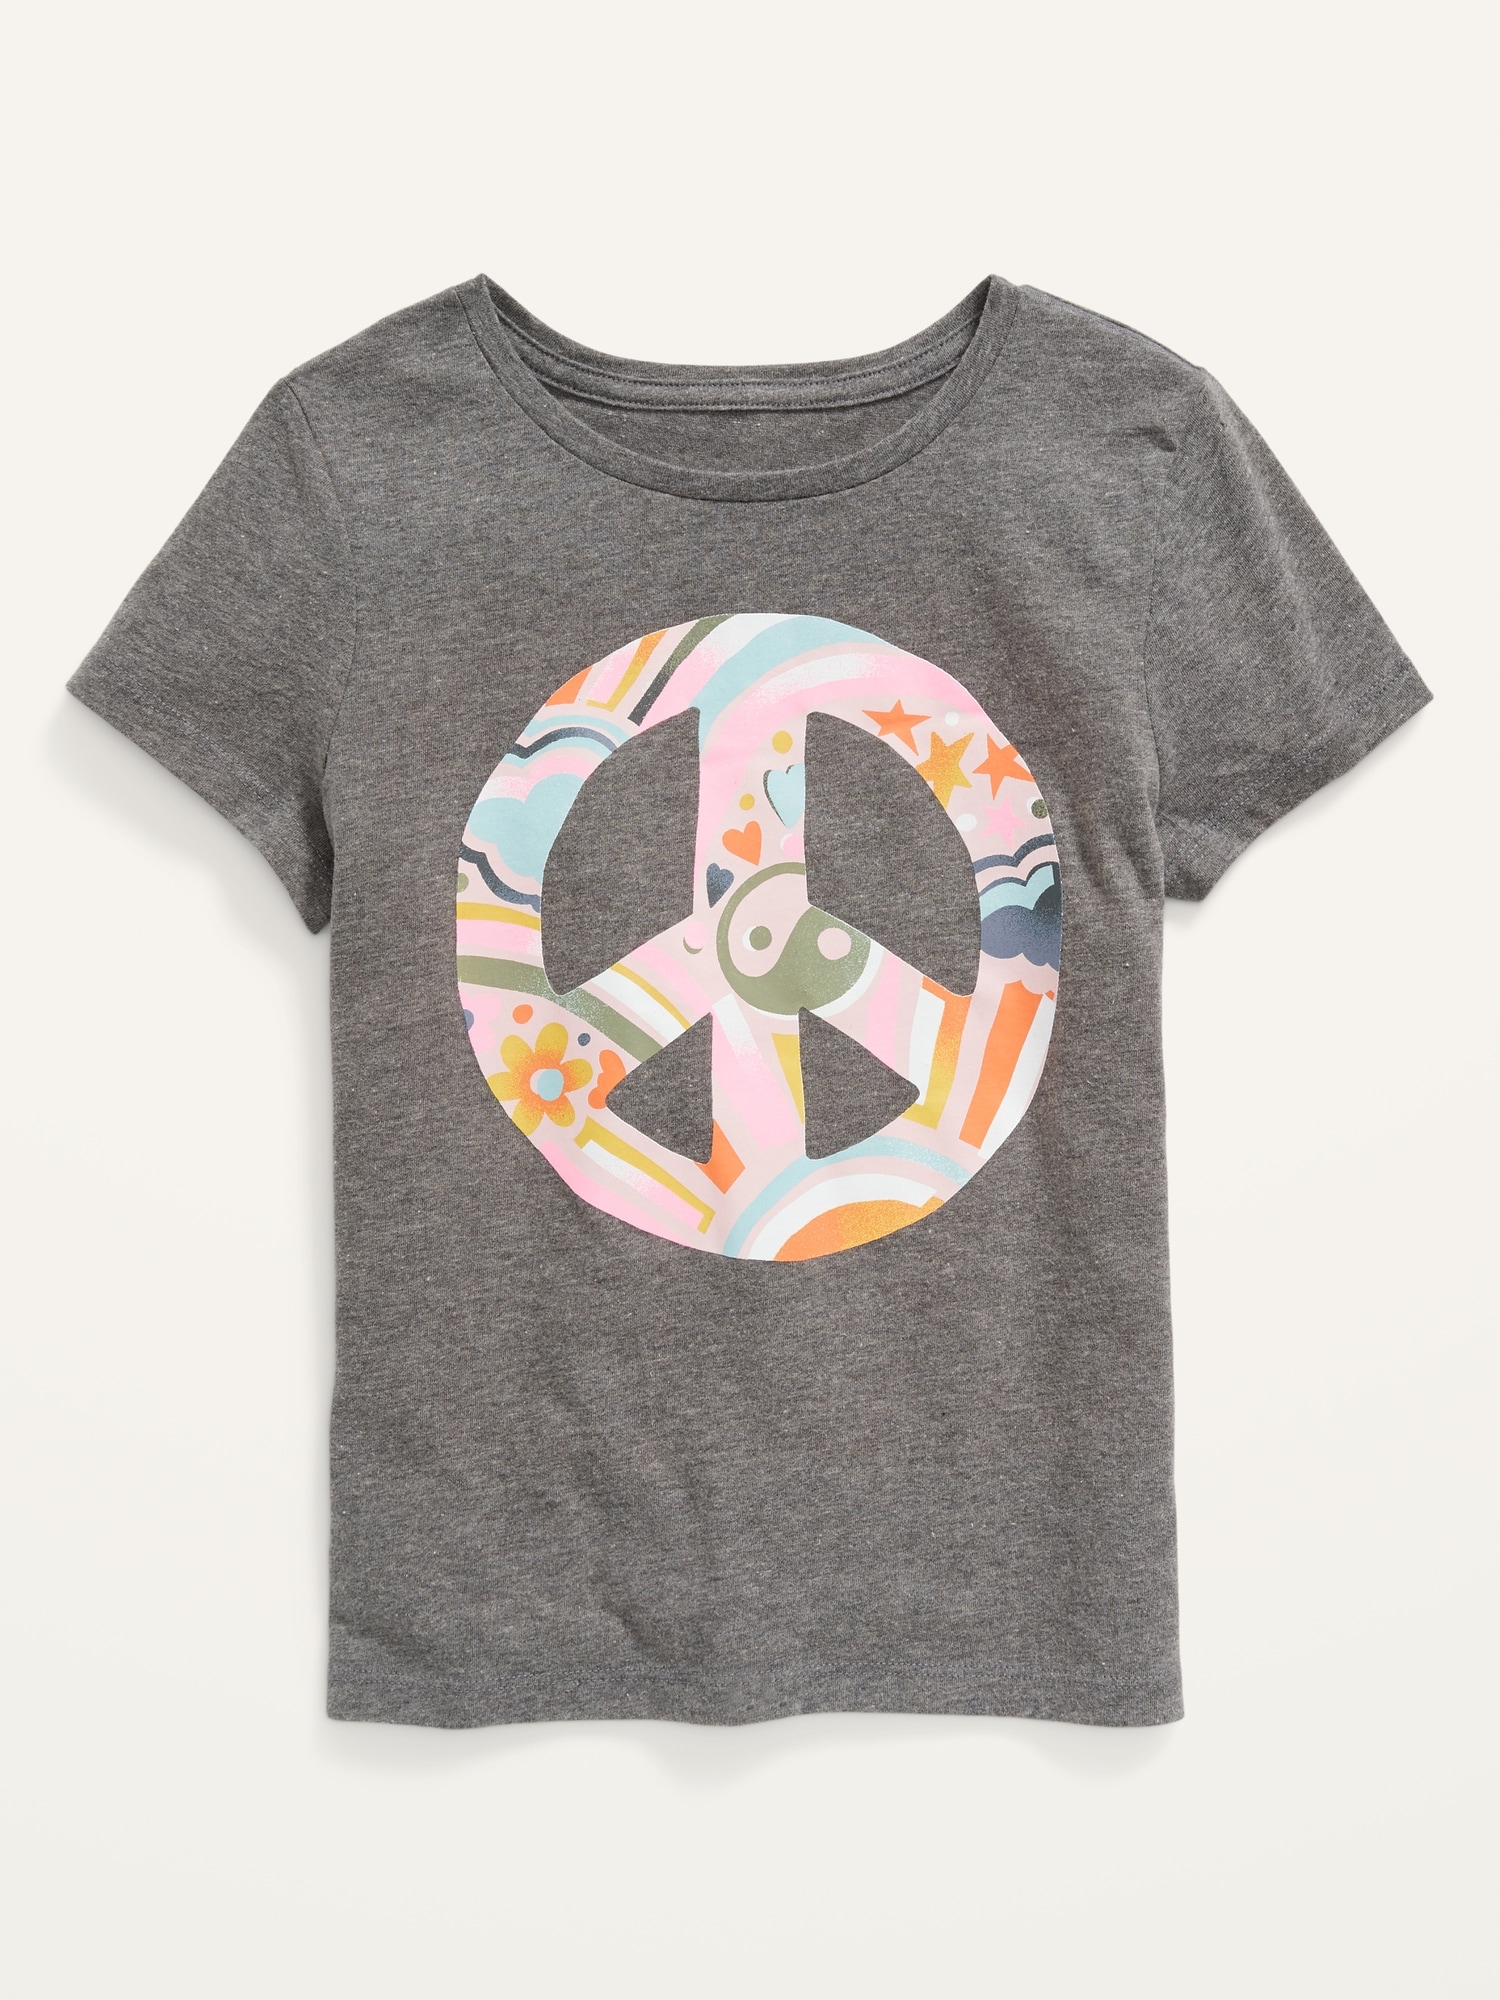 Short-Sleeve Graphic T-Shirt for Girls | Old Navy